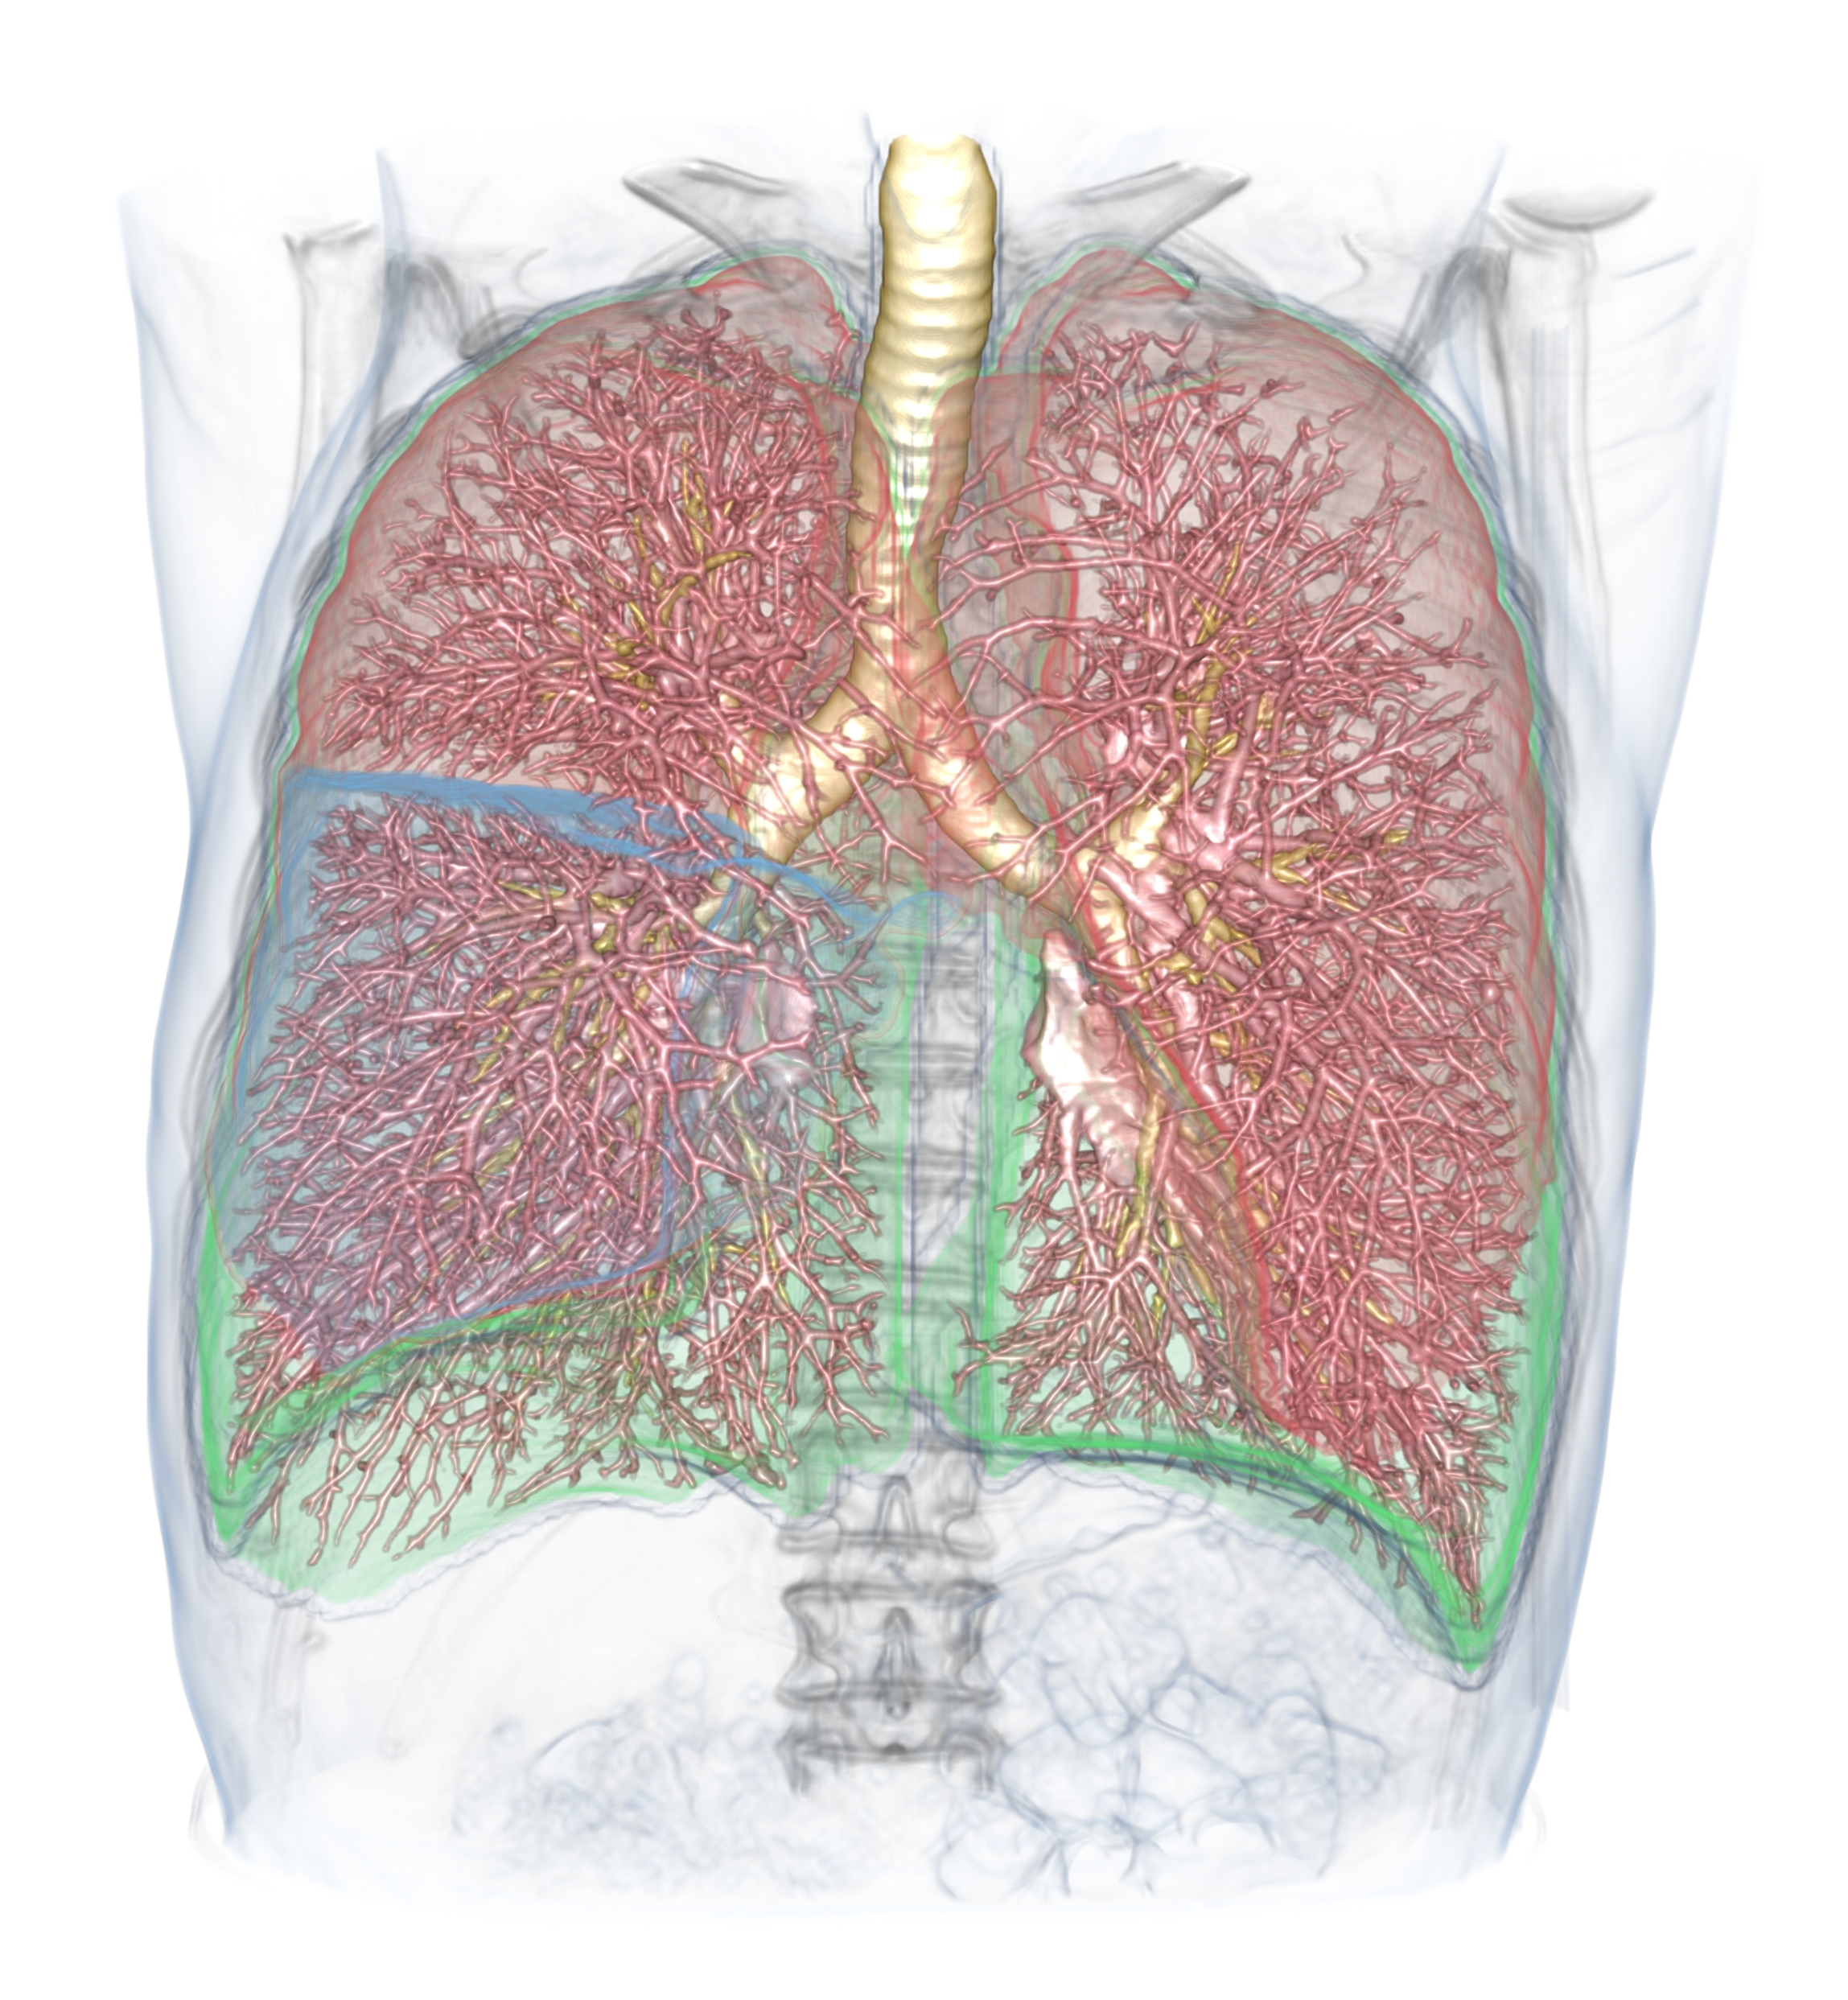 3D volume rendering of the segmented lungs, lung lobes, airways, and lung vessels